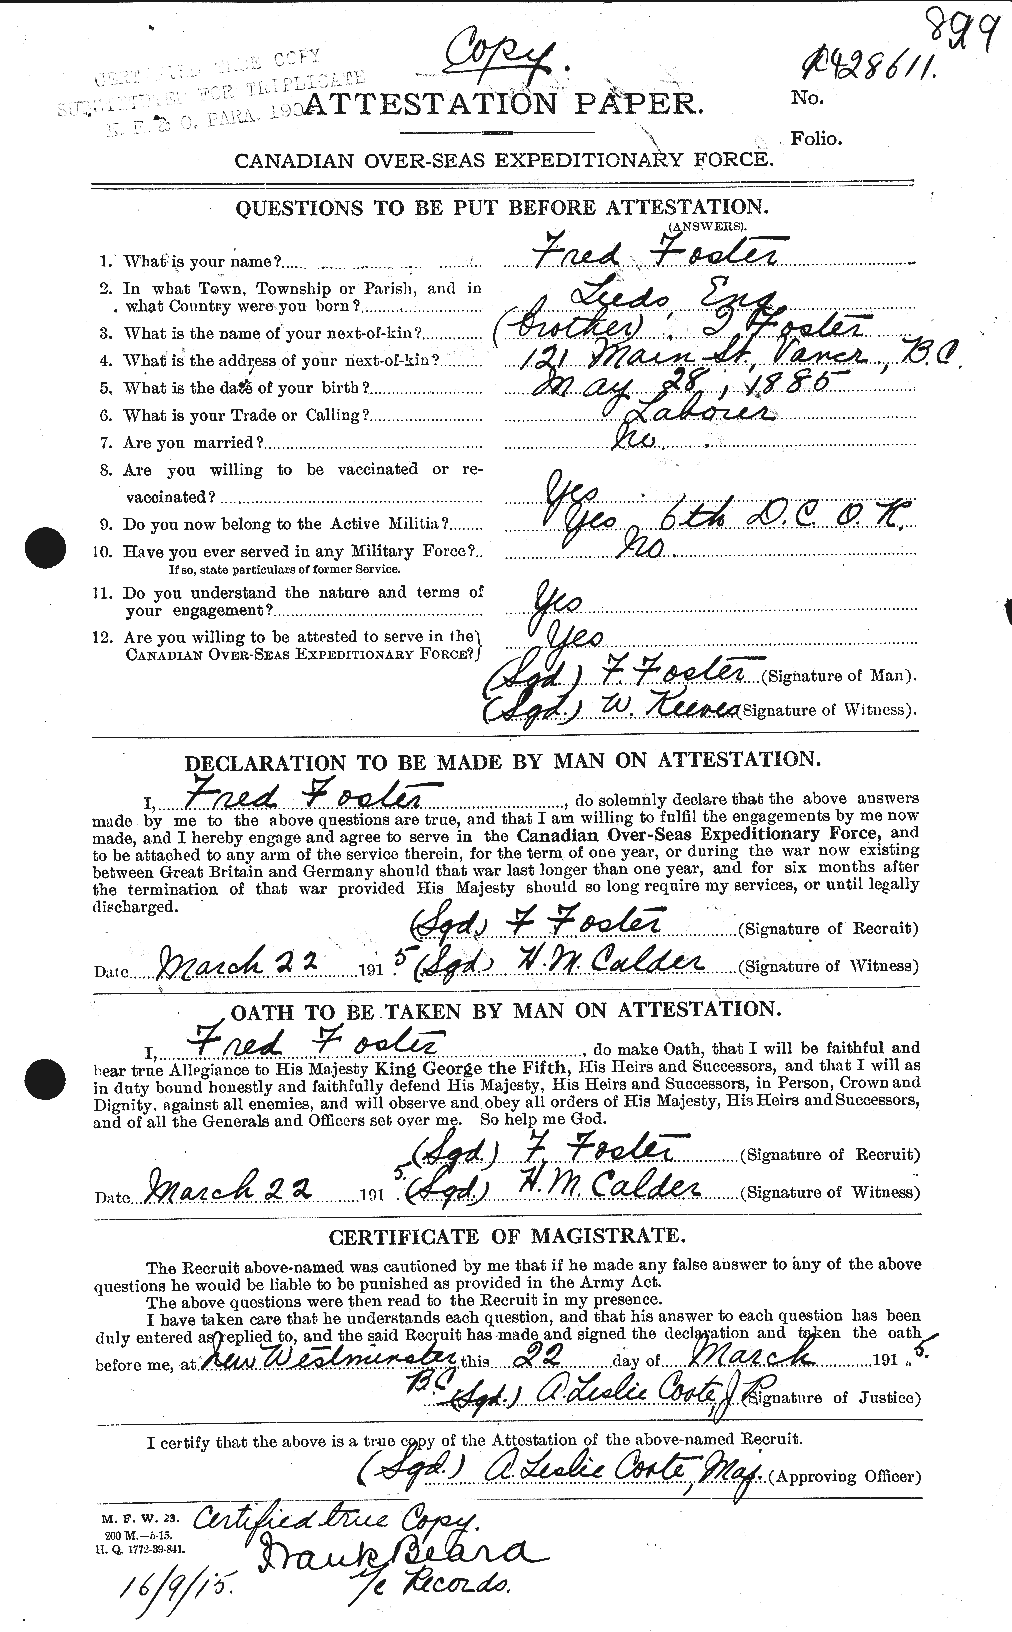 Personnel Records of the First World War - CEF 330634a